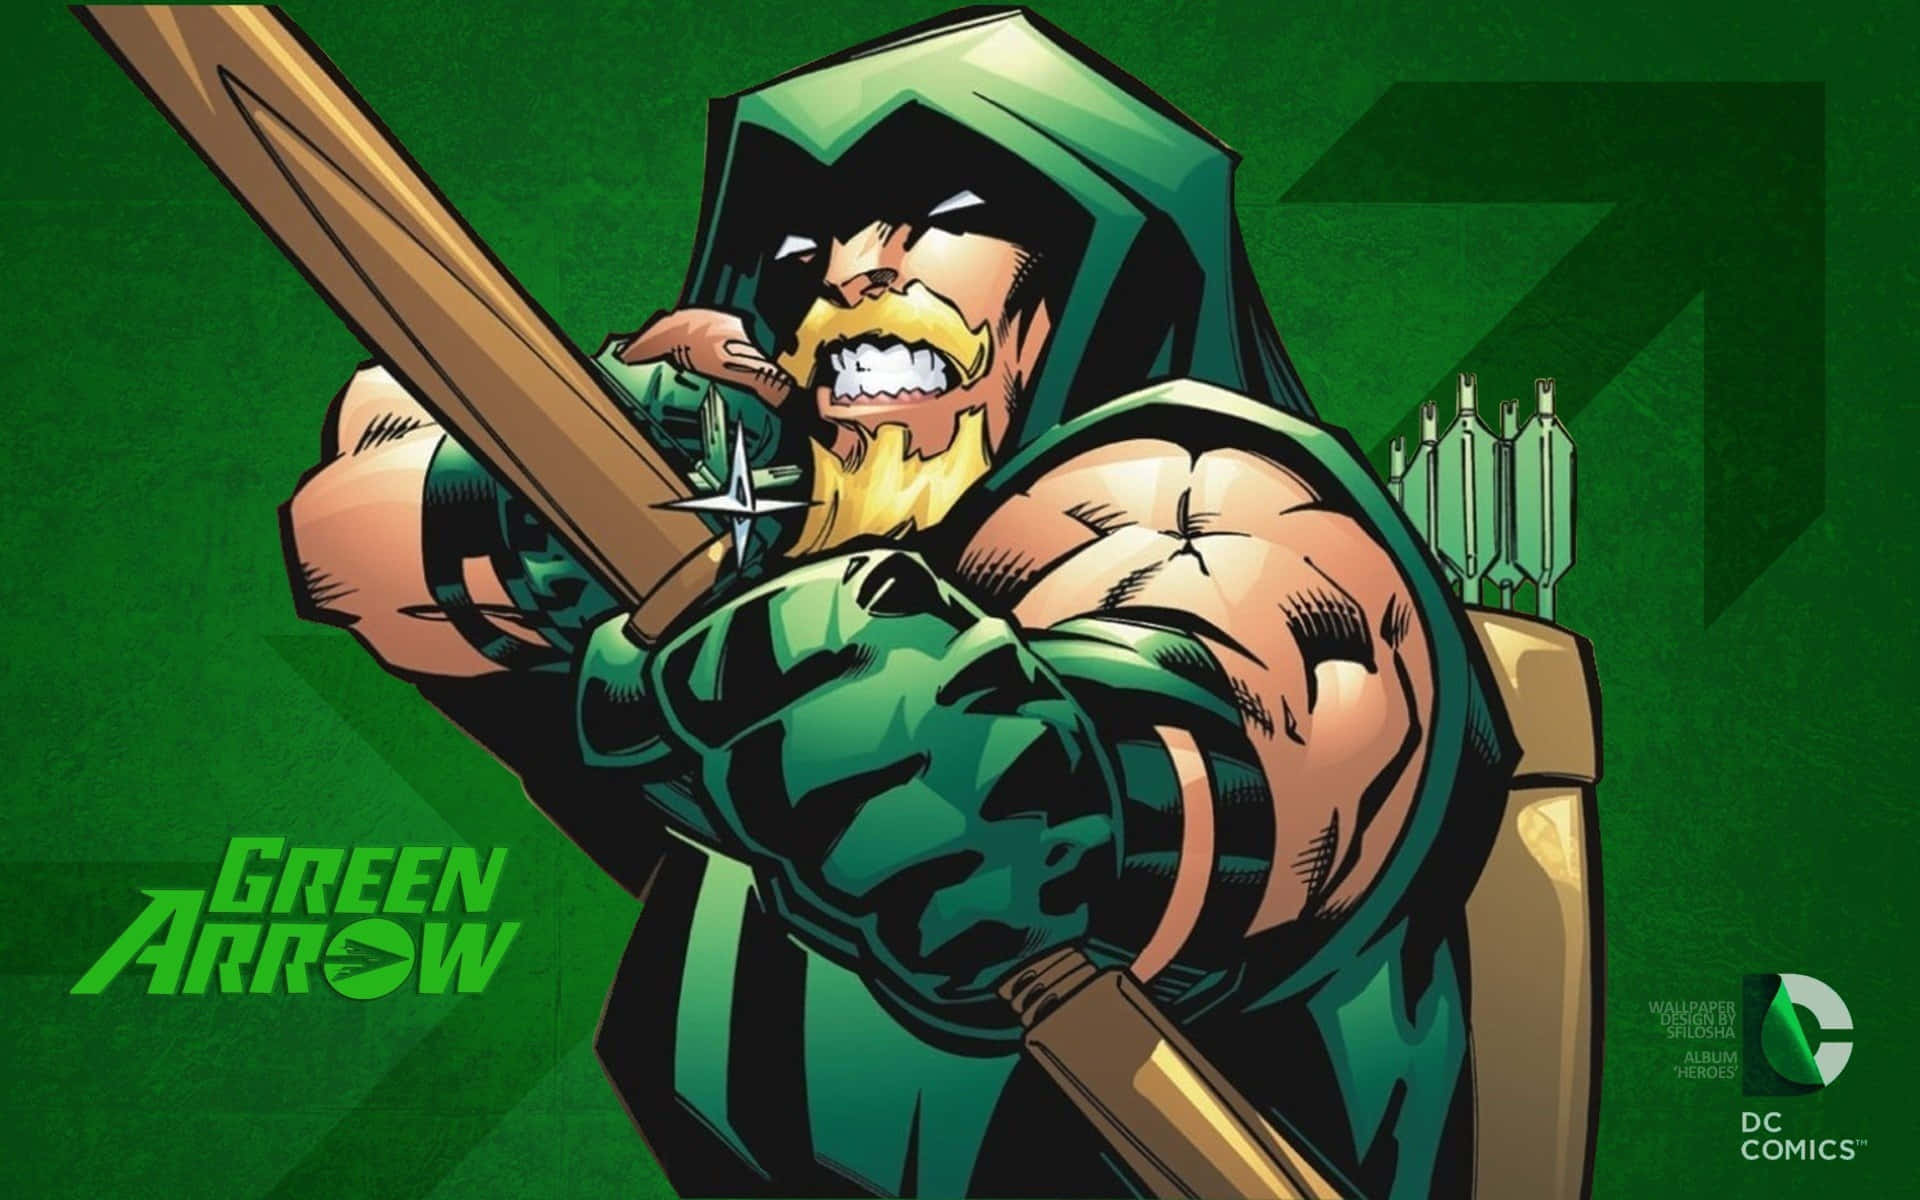 "Green Arrow Stands Against Evil"